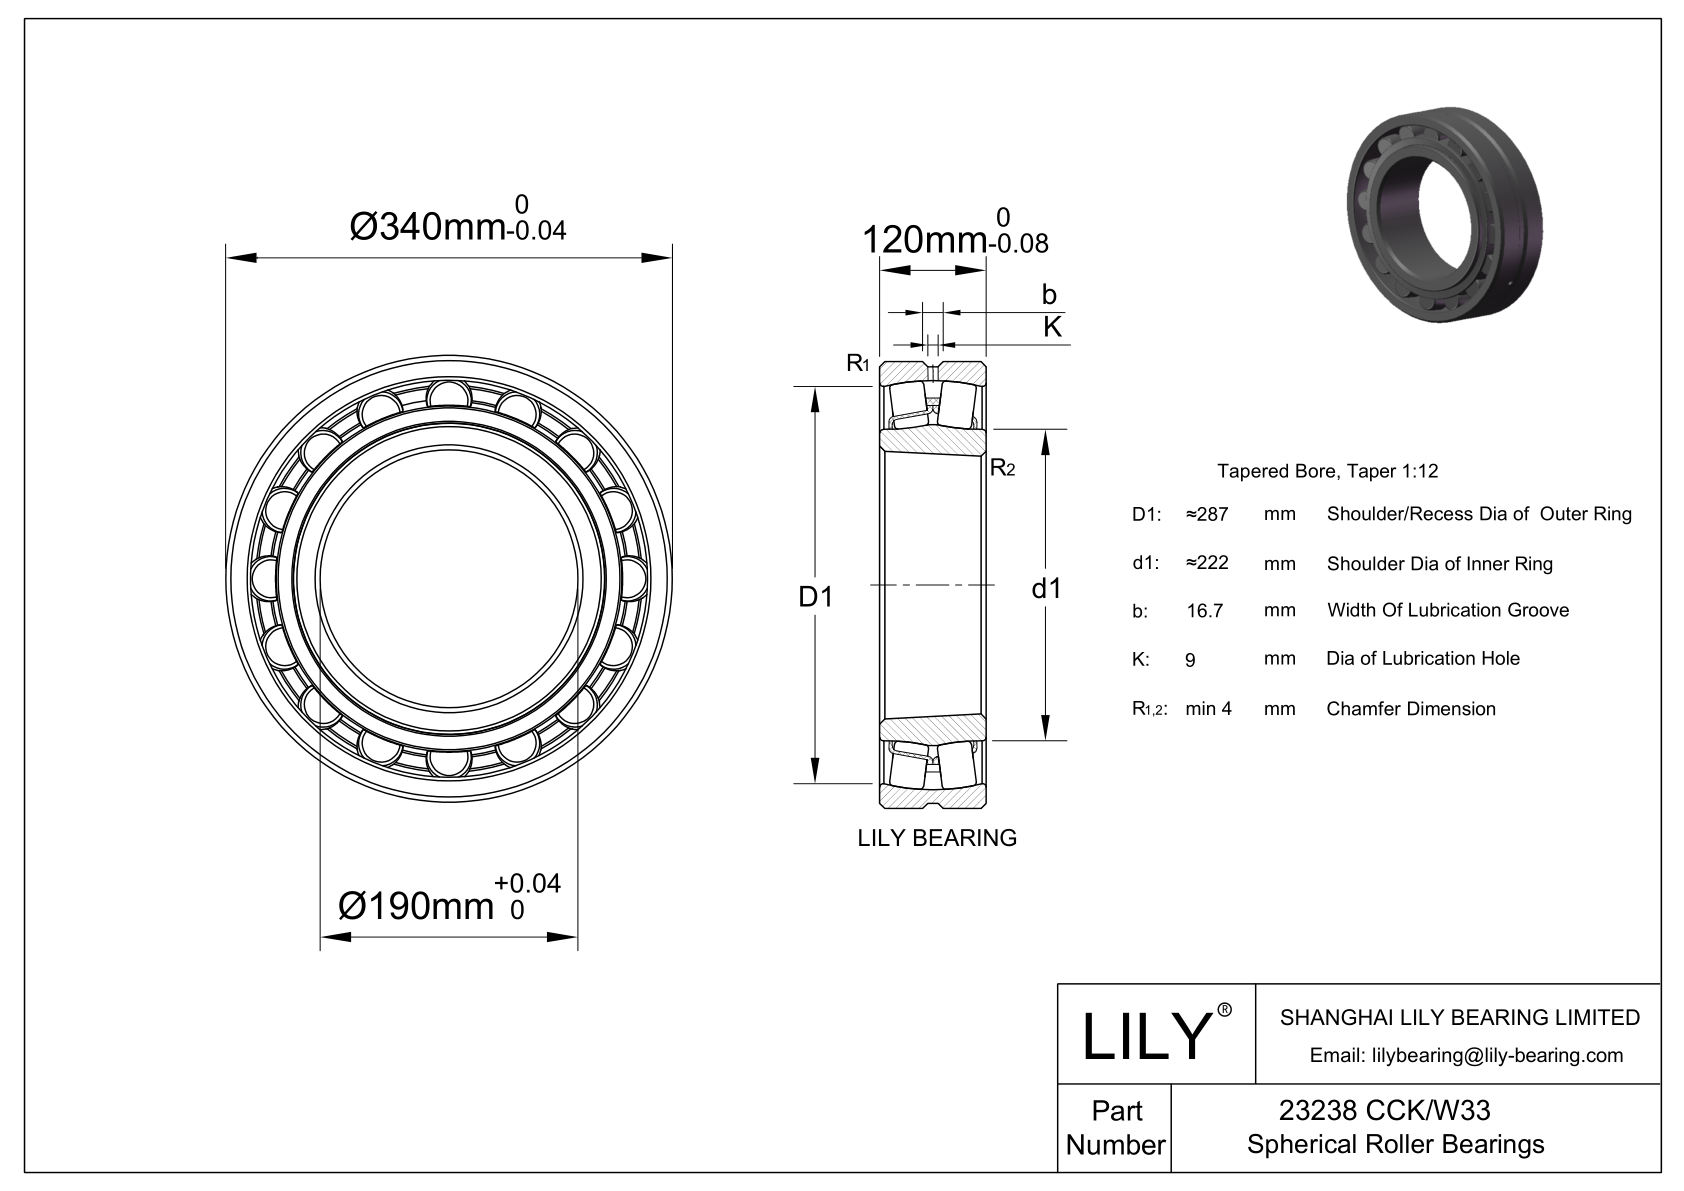 23238 CCK/W33 Double Row Spherical Roller Bearing cad drawing